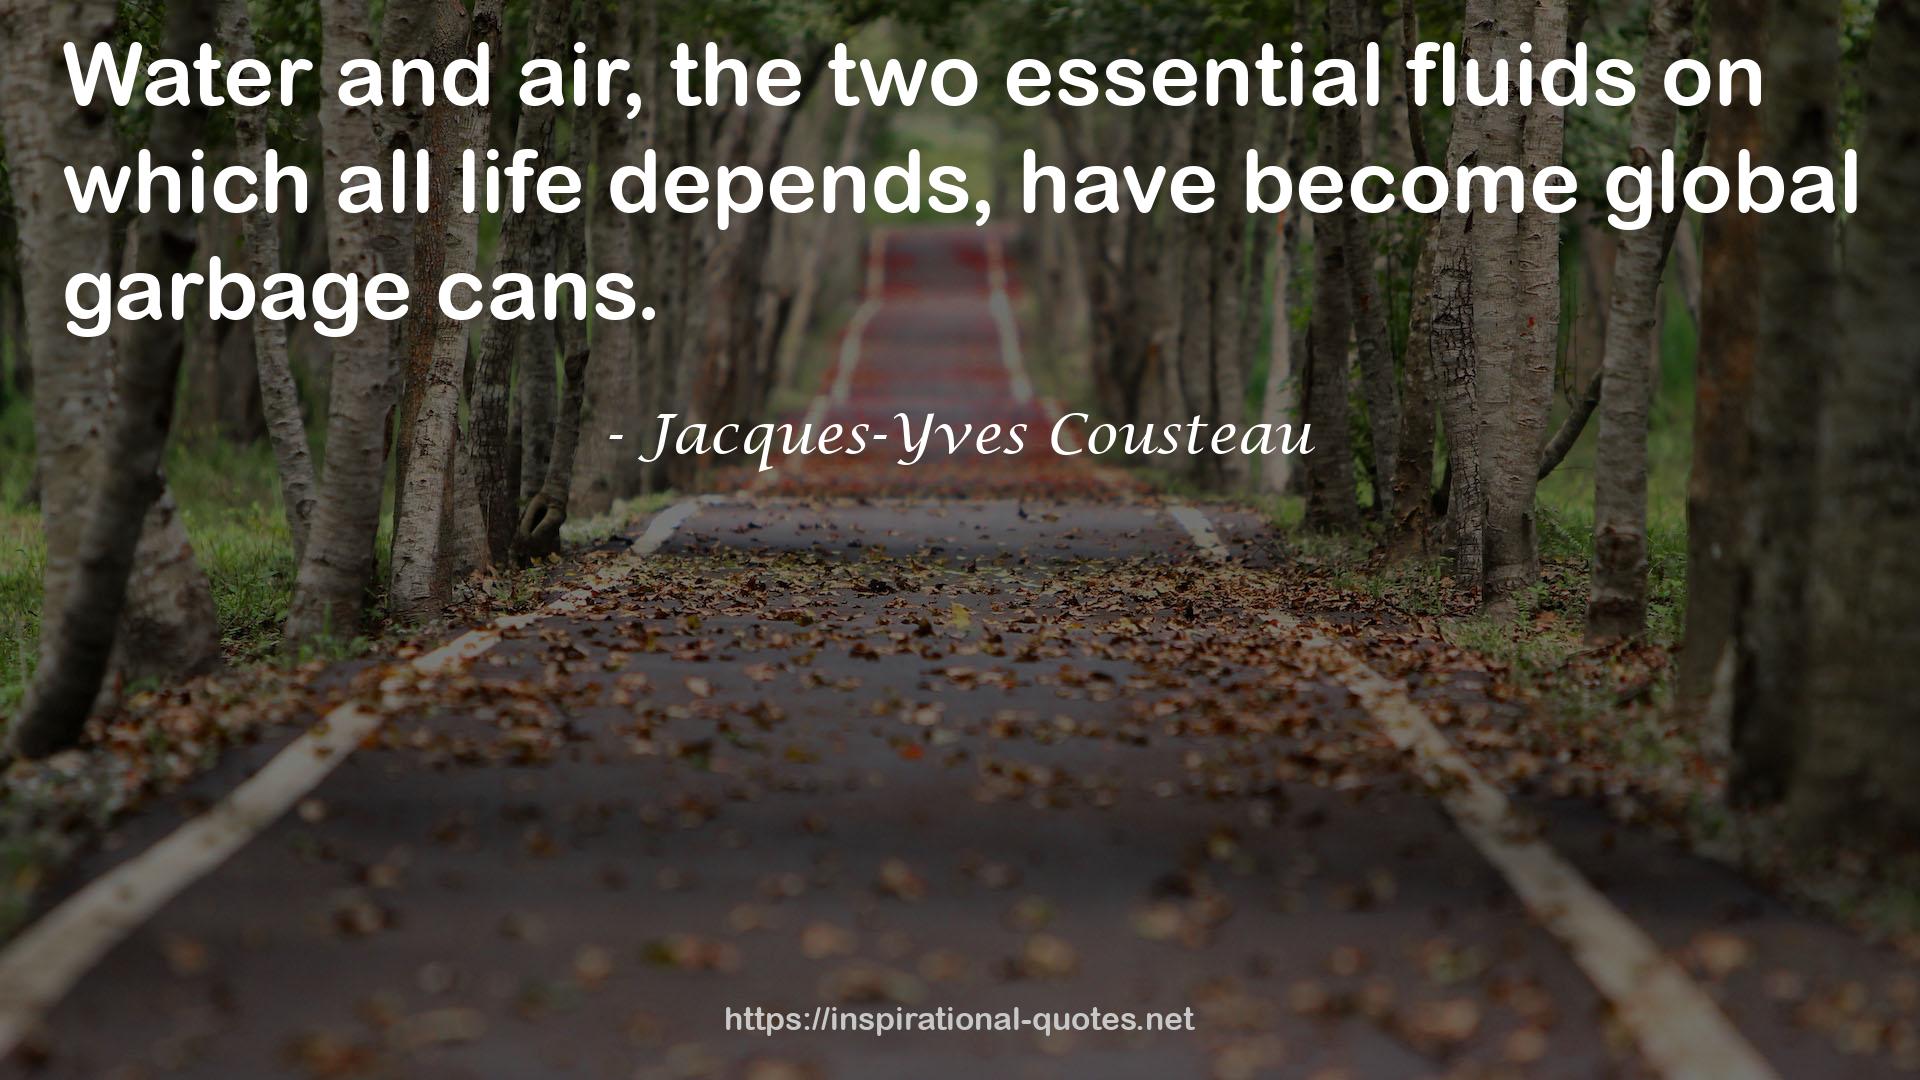 Jacques-Yves Cousteau QUOTES